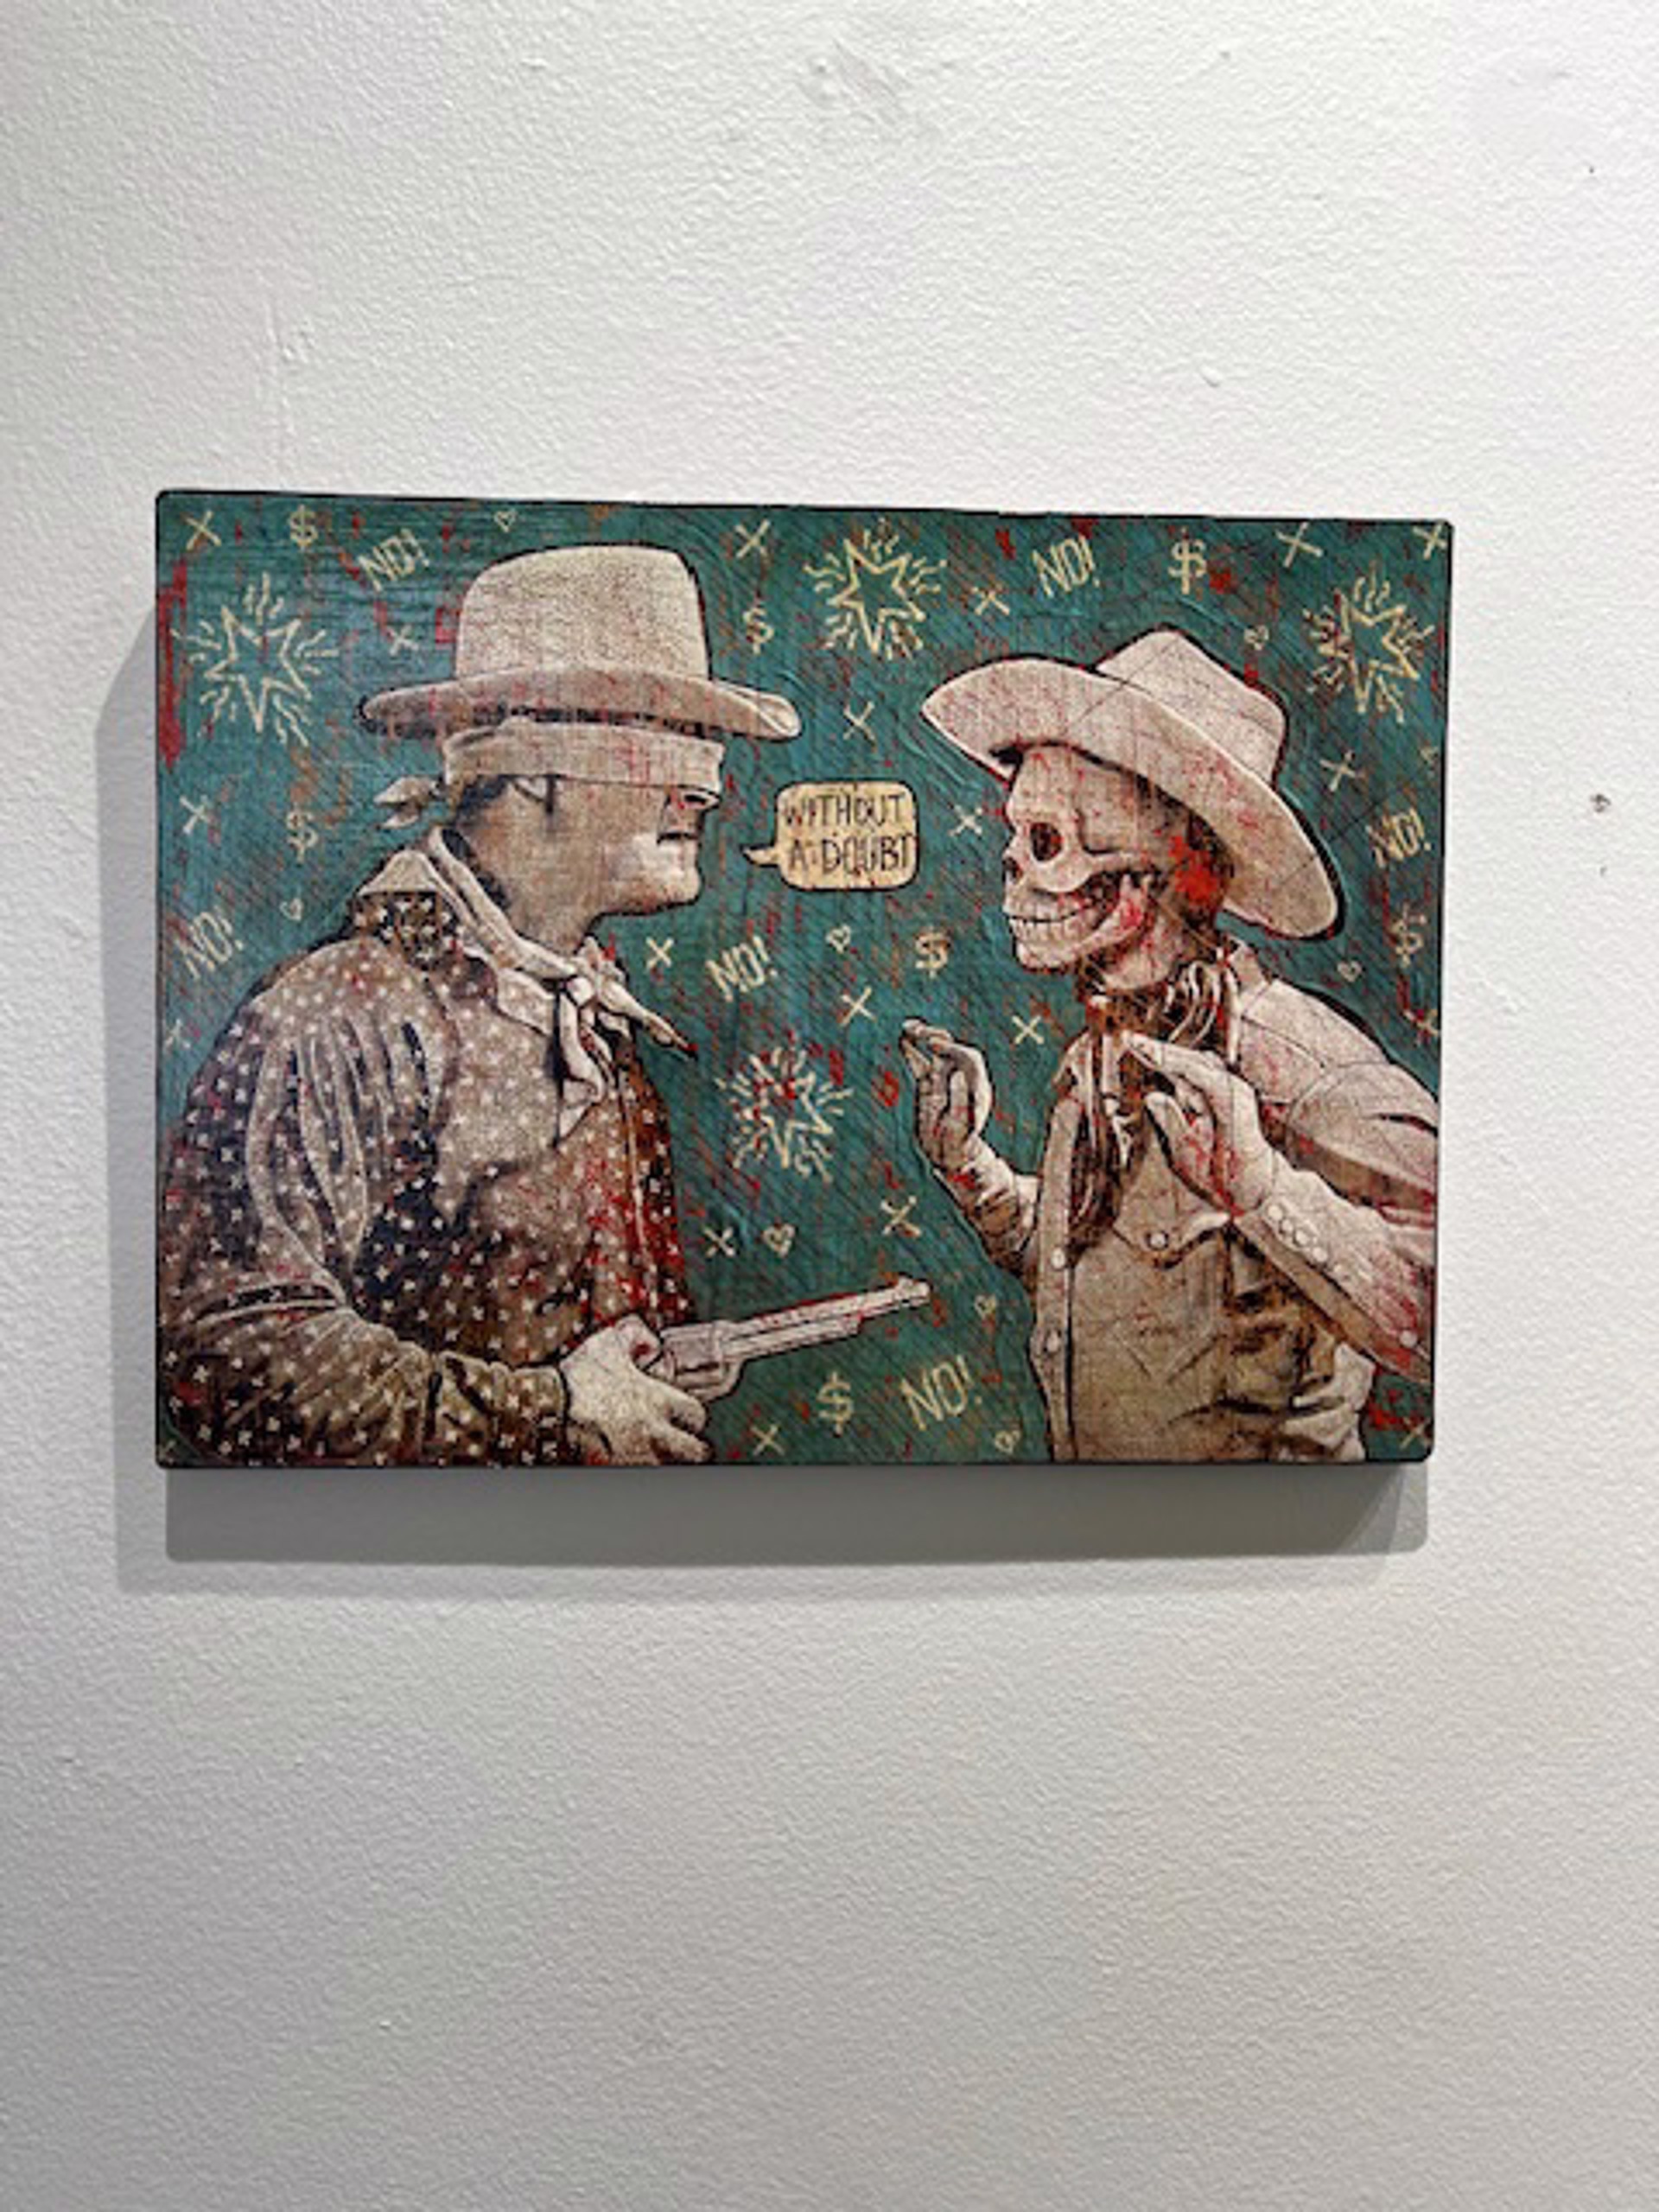 Without a Doubt by Jon Langford